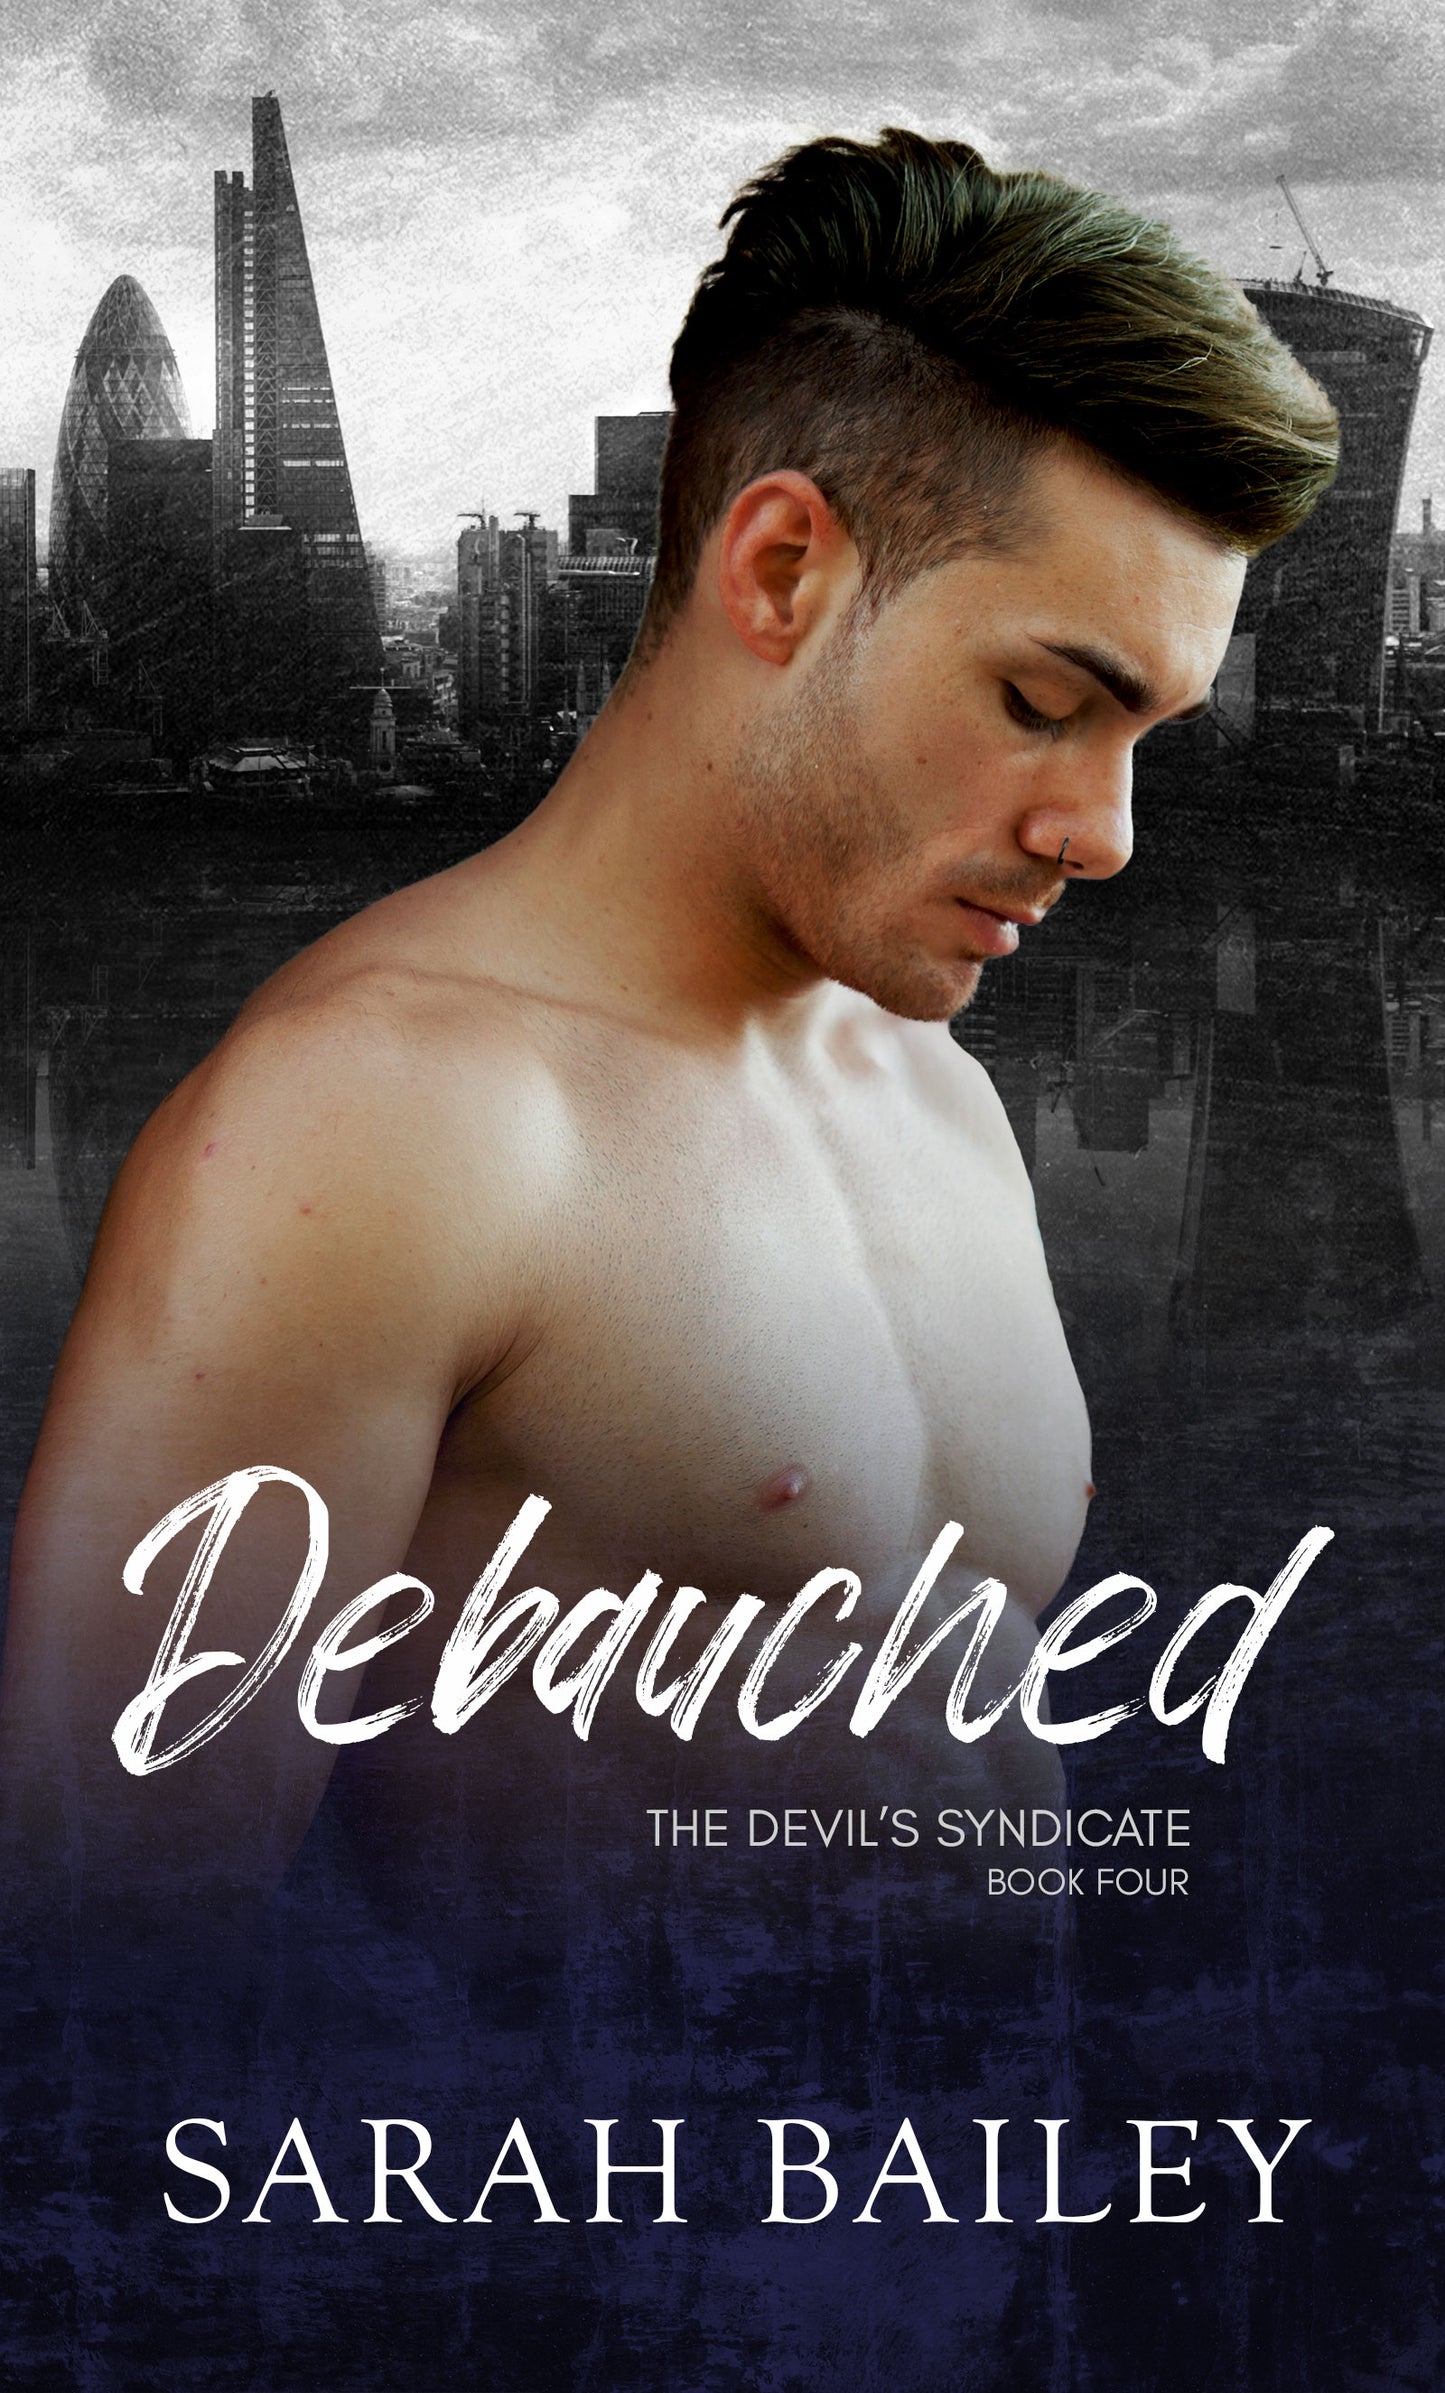 Debauched Signed Paperback